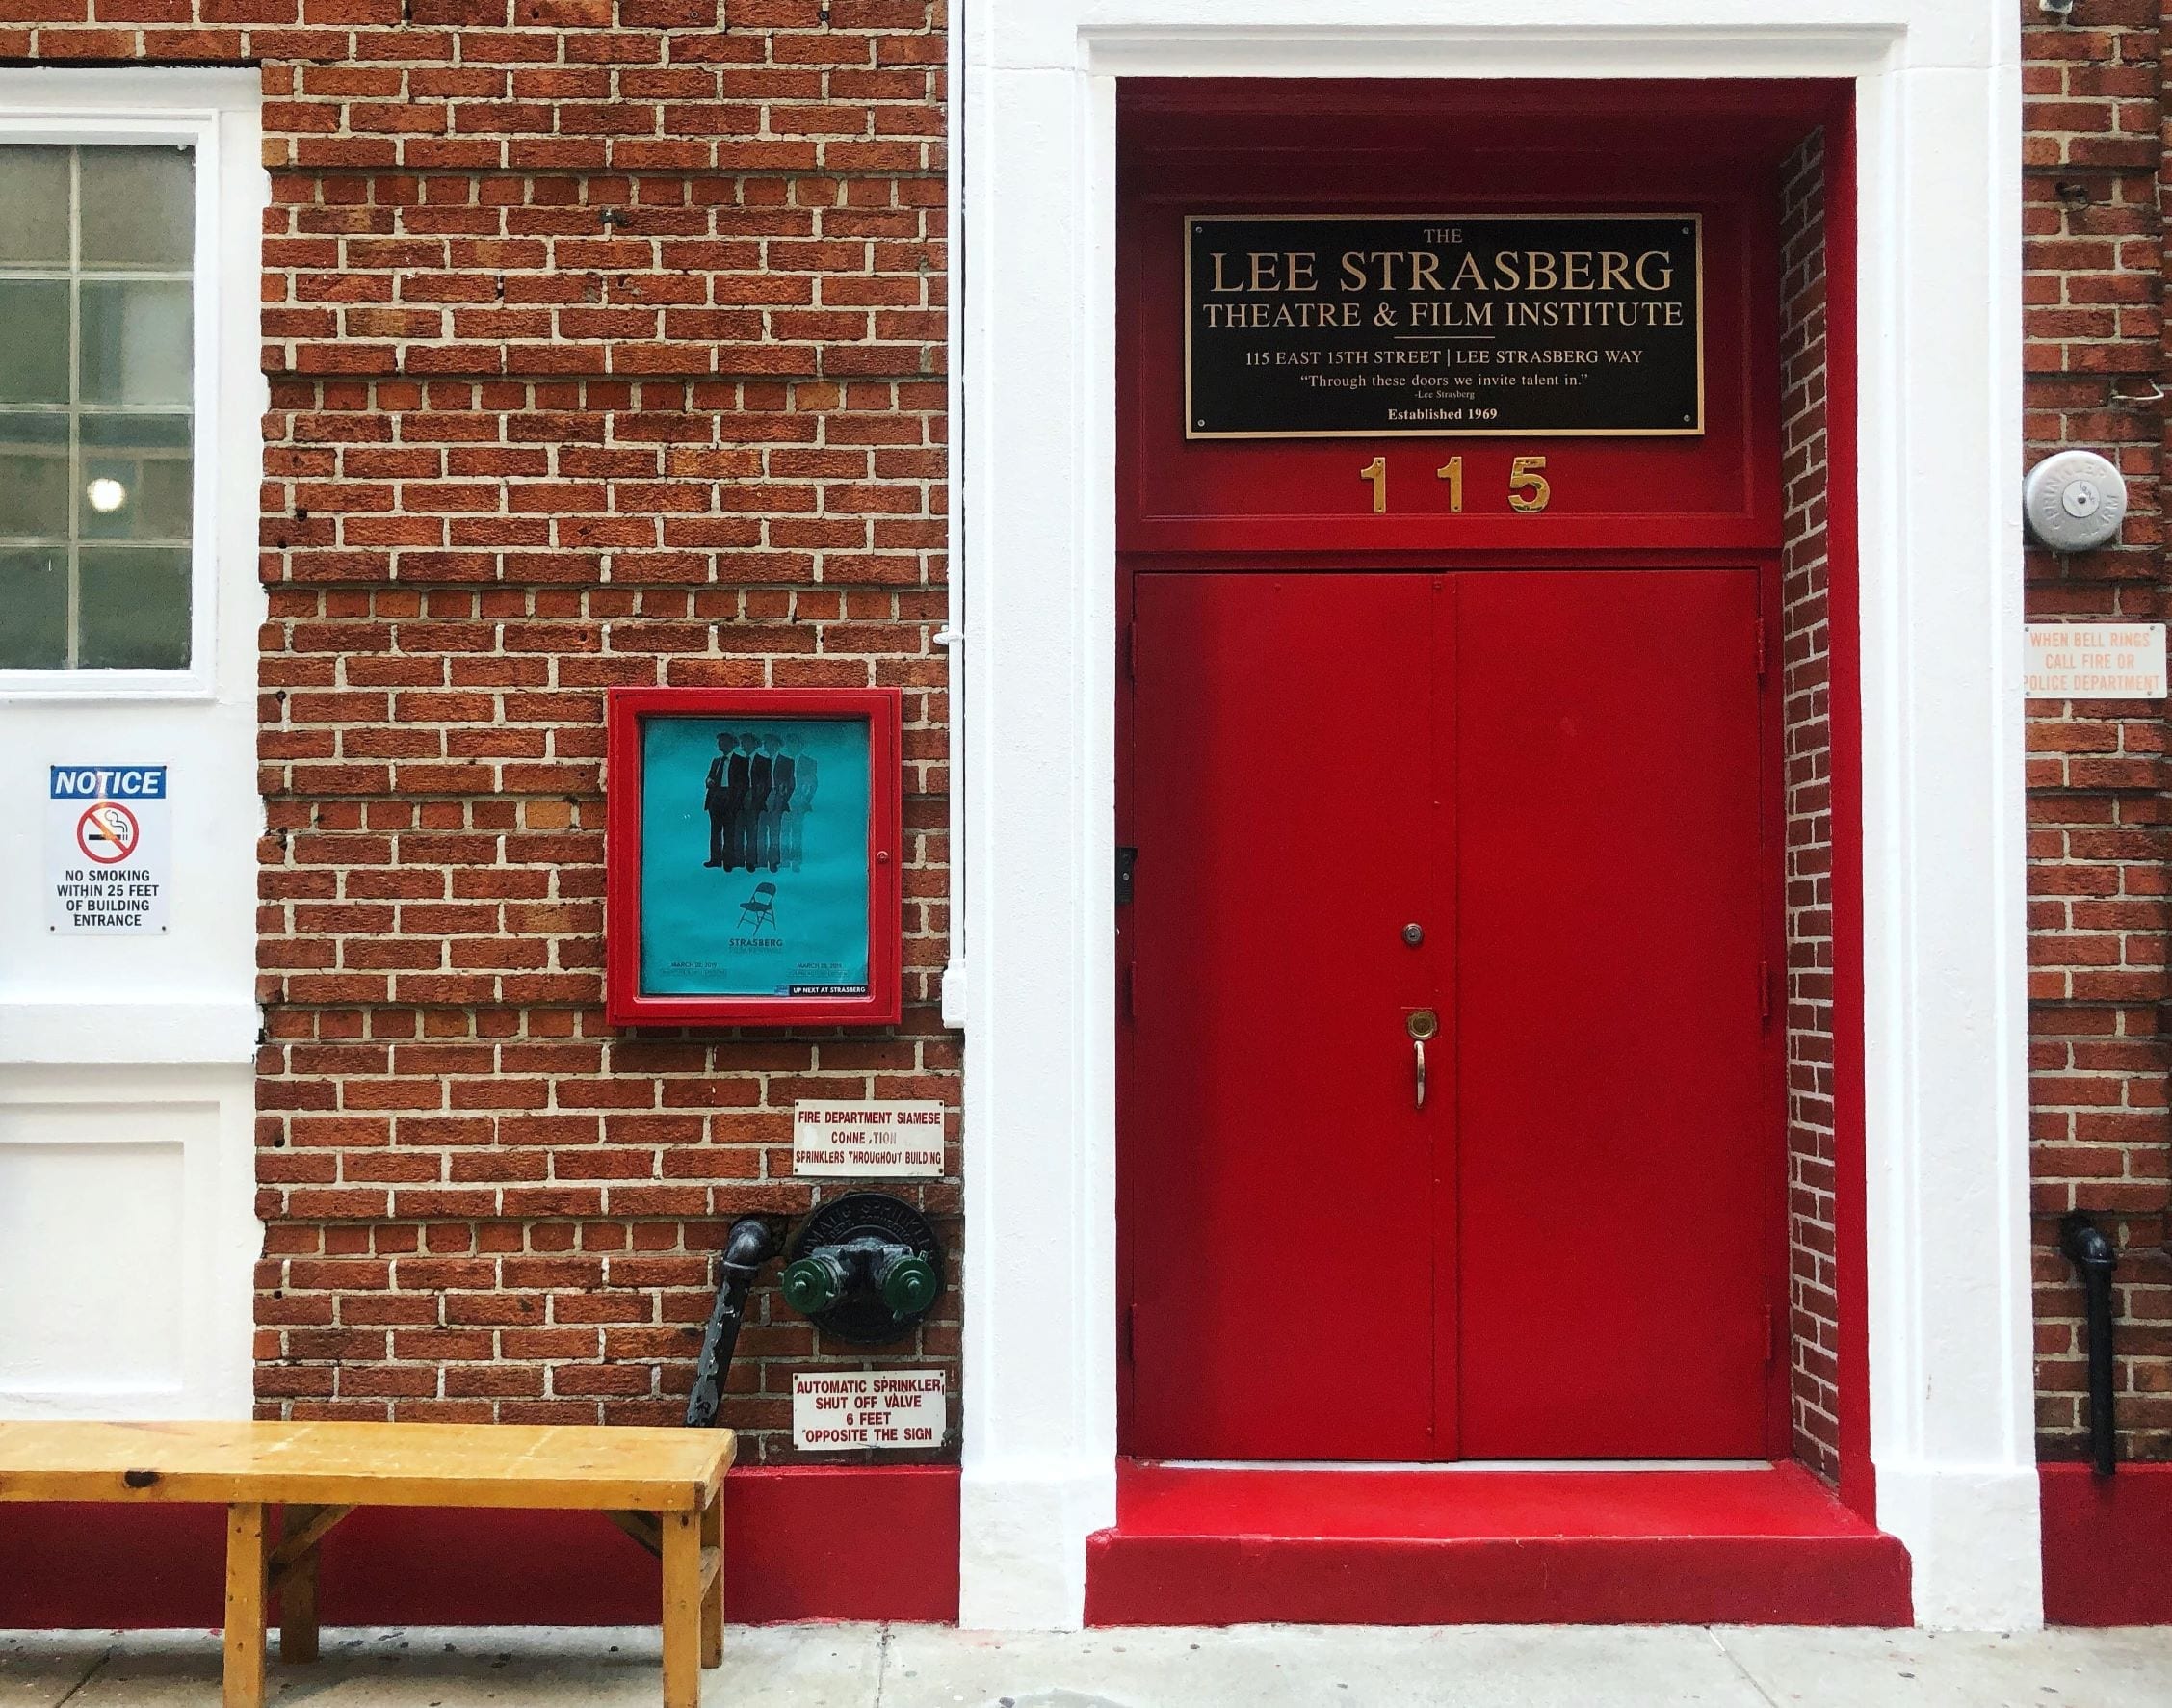 About – NYC Campus - The Lee Strasberg Theatre & Film Institute